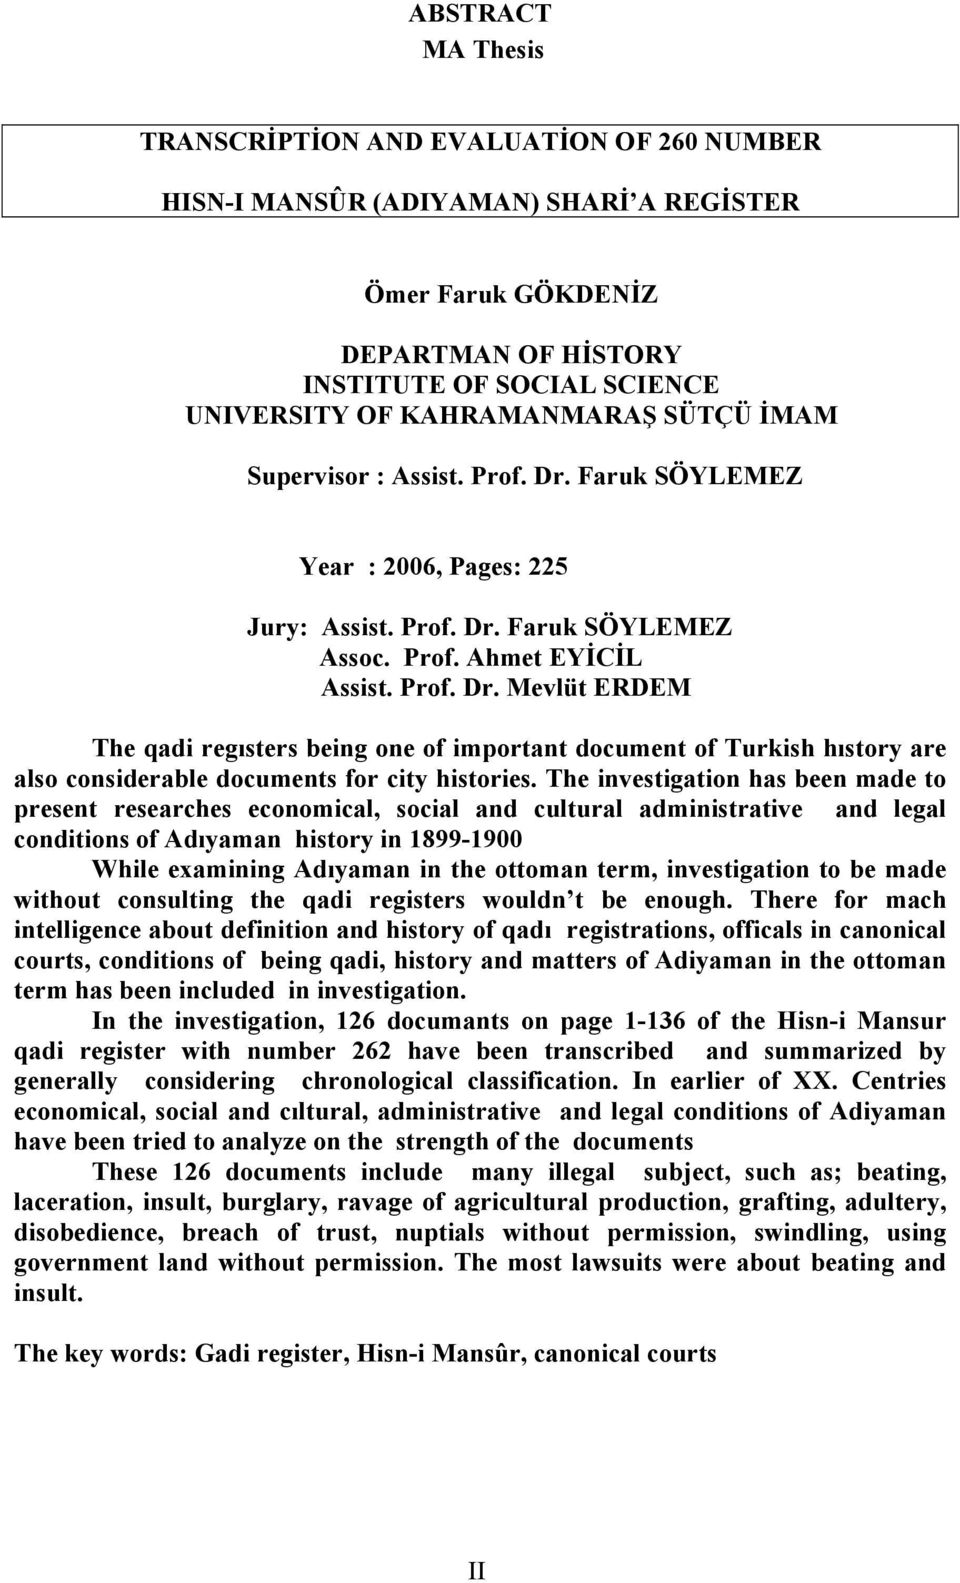 The investigation has been made to present researches economical, social and cultural administrative and legal conditions of Adıyaman history in 1899-1900 While examining Adıyaman in the ottoman